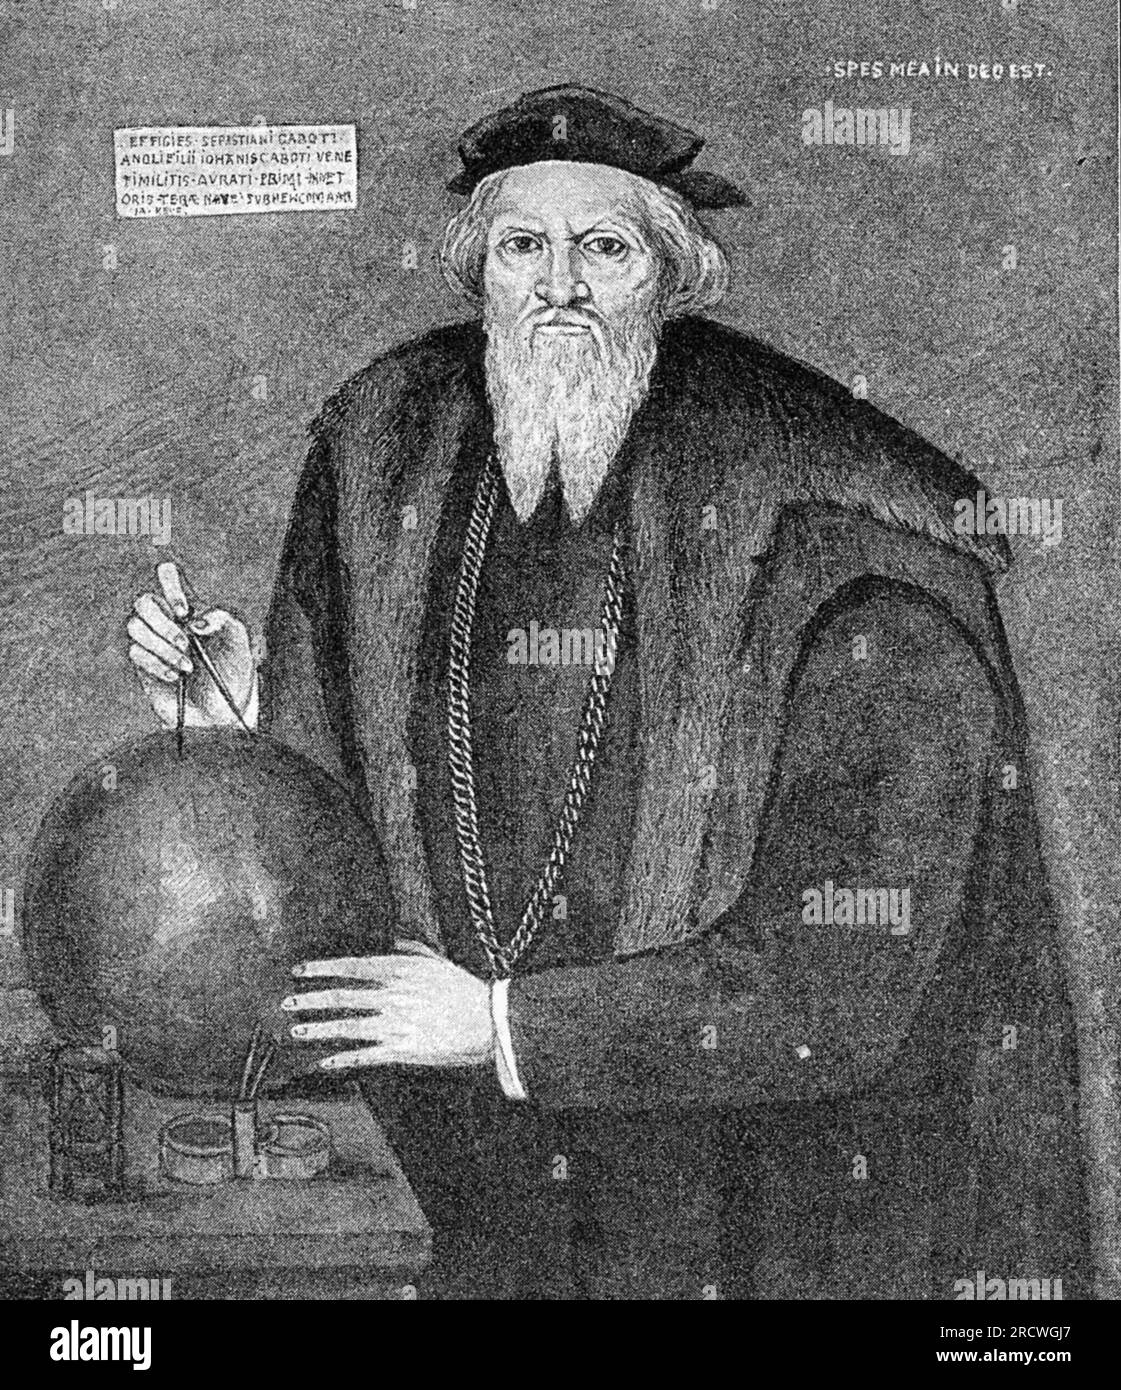 Cabot, Sebastian, circa 1484 - 1557, Italian navigator and discoverer, ADDITIONAL-RIGHTS-CLEARANCE-INFO-NOT-AVAILABLE Stock Photo